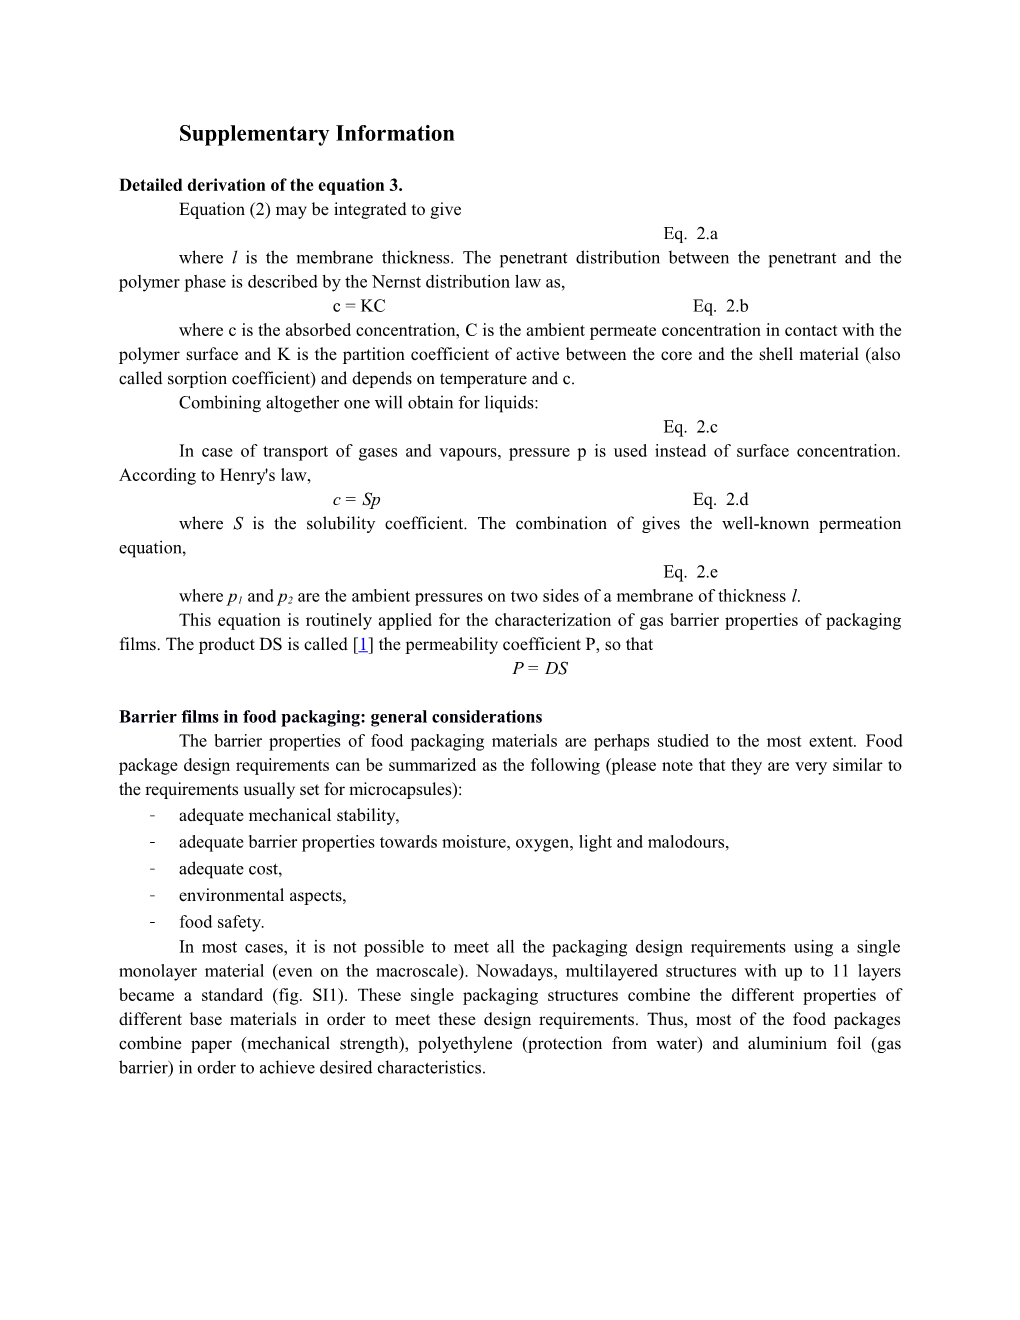 Detailed Derivation of the Equation 3